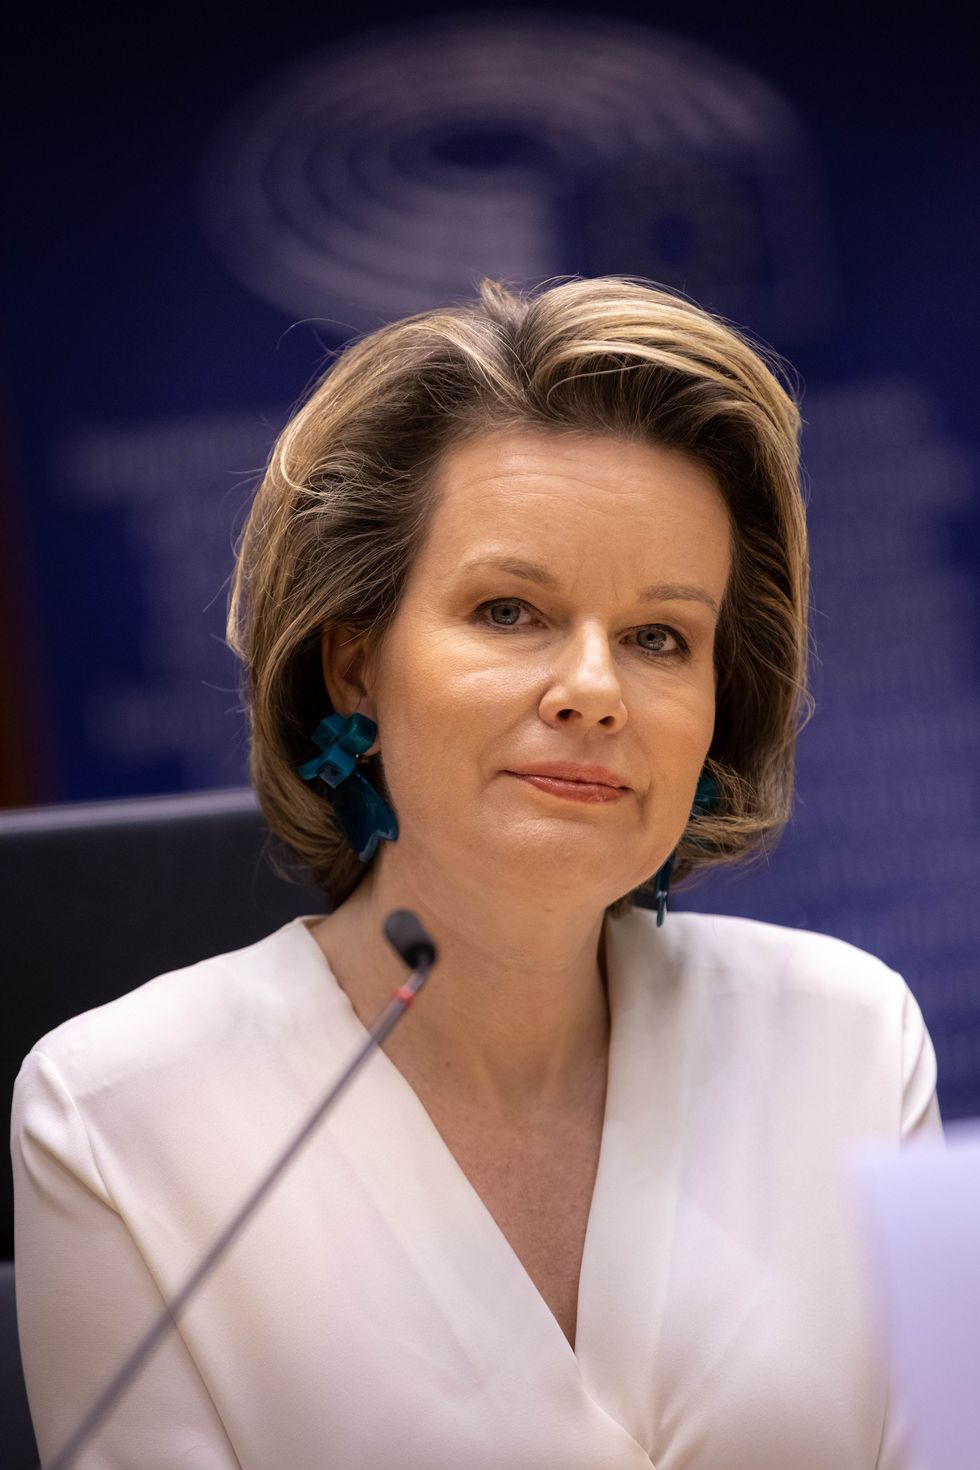 queen mathilde of belgium delivers a speech at the 30th anniversary of the un convention on the rights of the child in europe